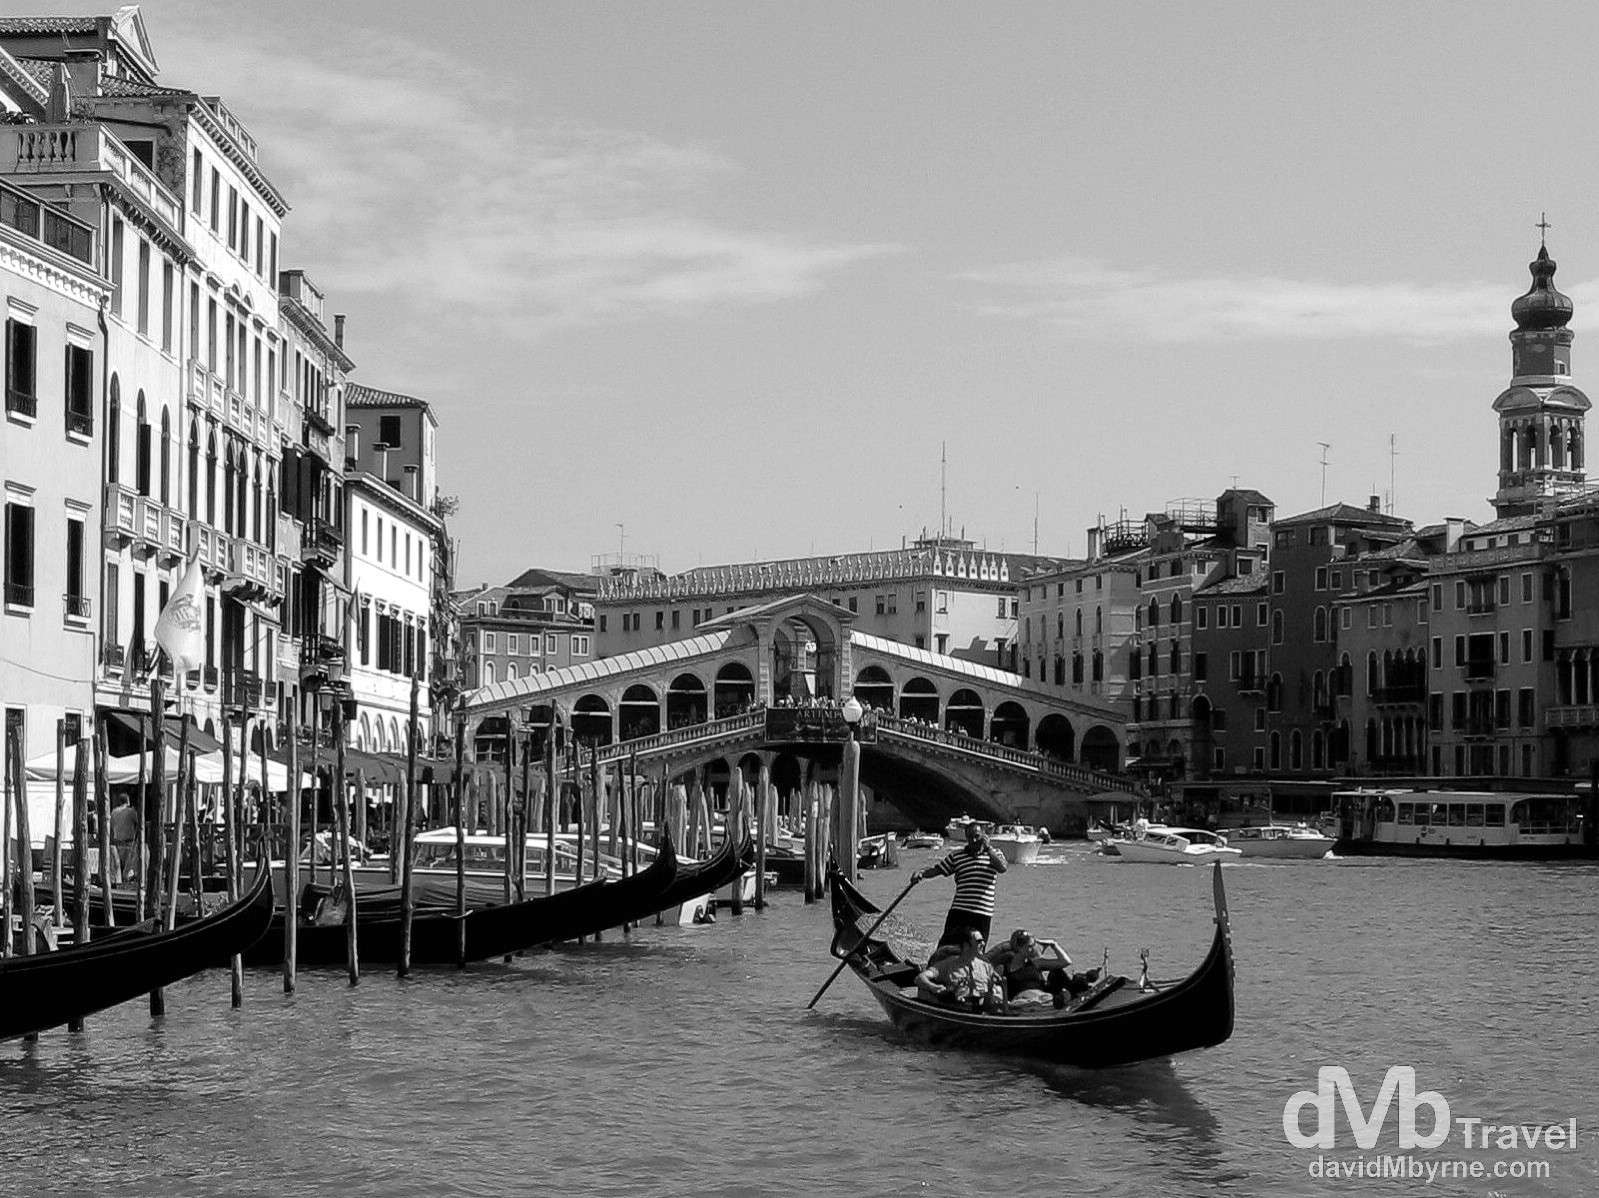 On the Grand Canal in Venice, Veneto, Italy. August 27th, 2007. 